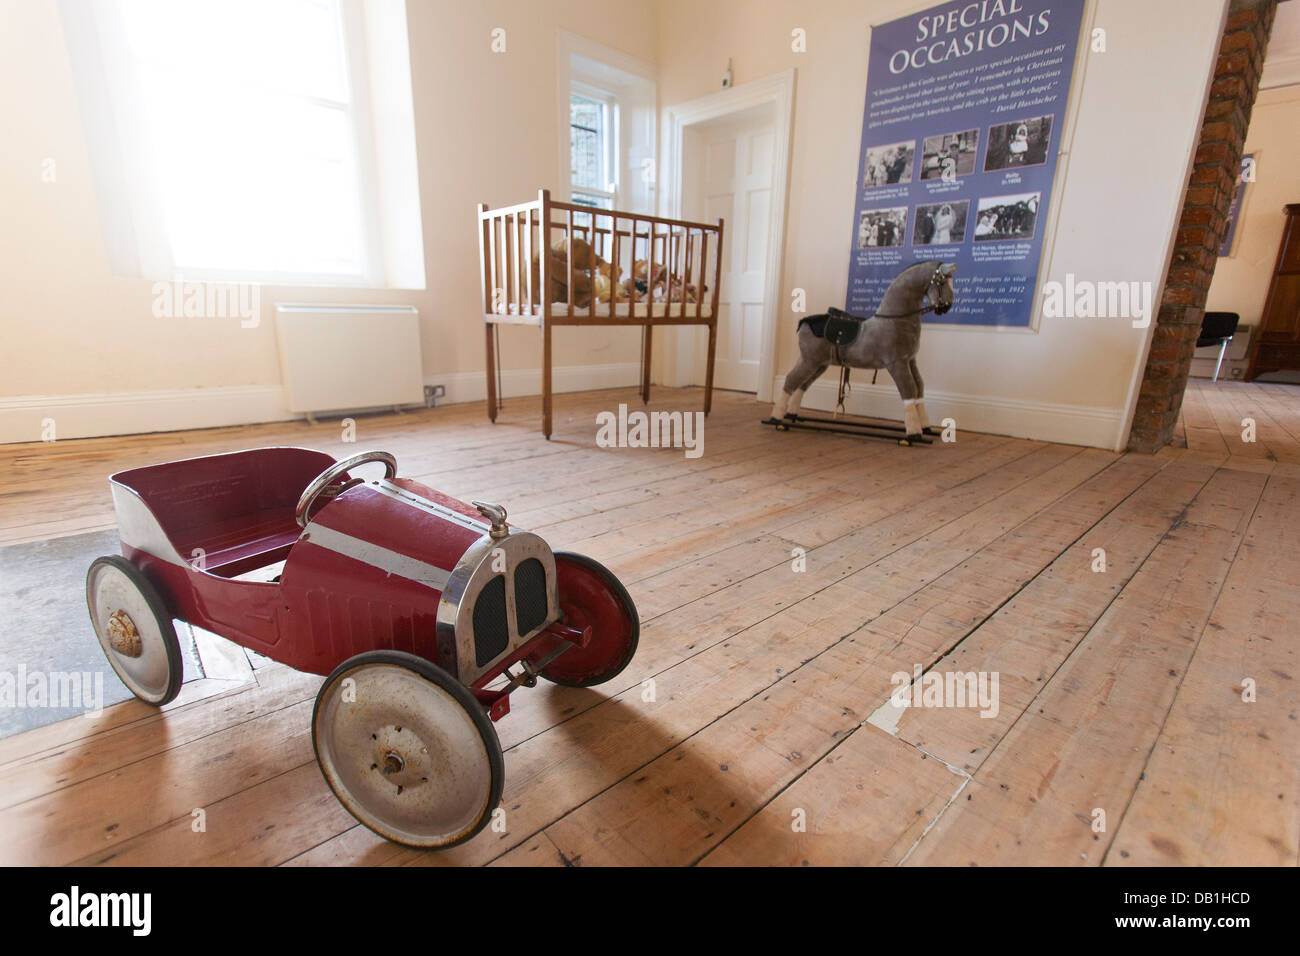 A childrens toy and play room in the living quarters interior of Enniscorthy Castle Museum in County Wexford, Ireland Stock Photo